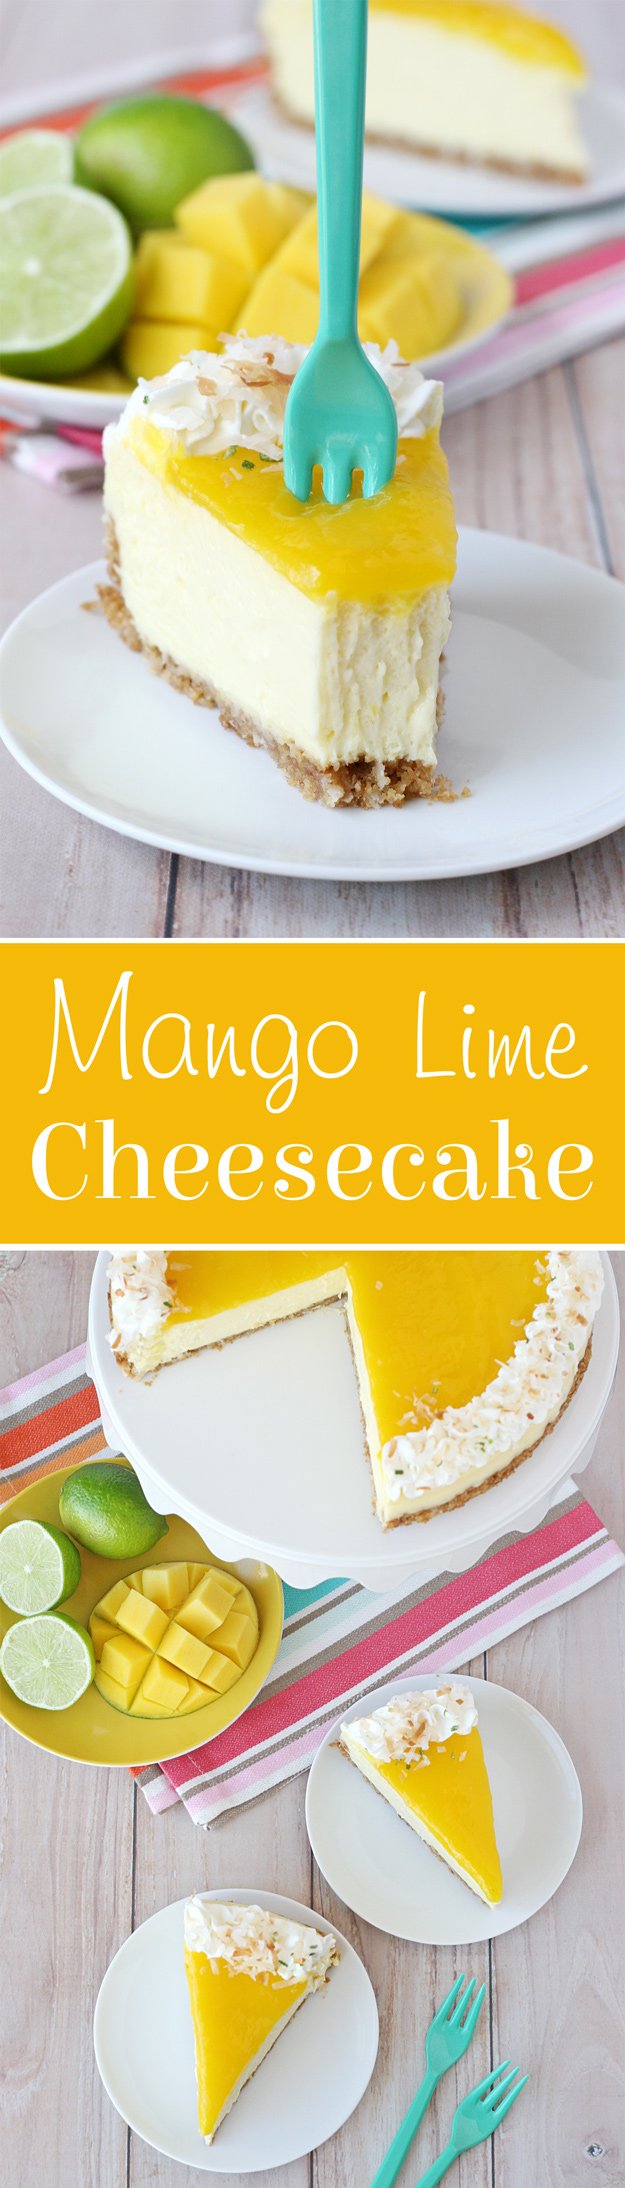 This Mango Lime Cheesecake is rich, creamy and bursting with tropical flavor!